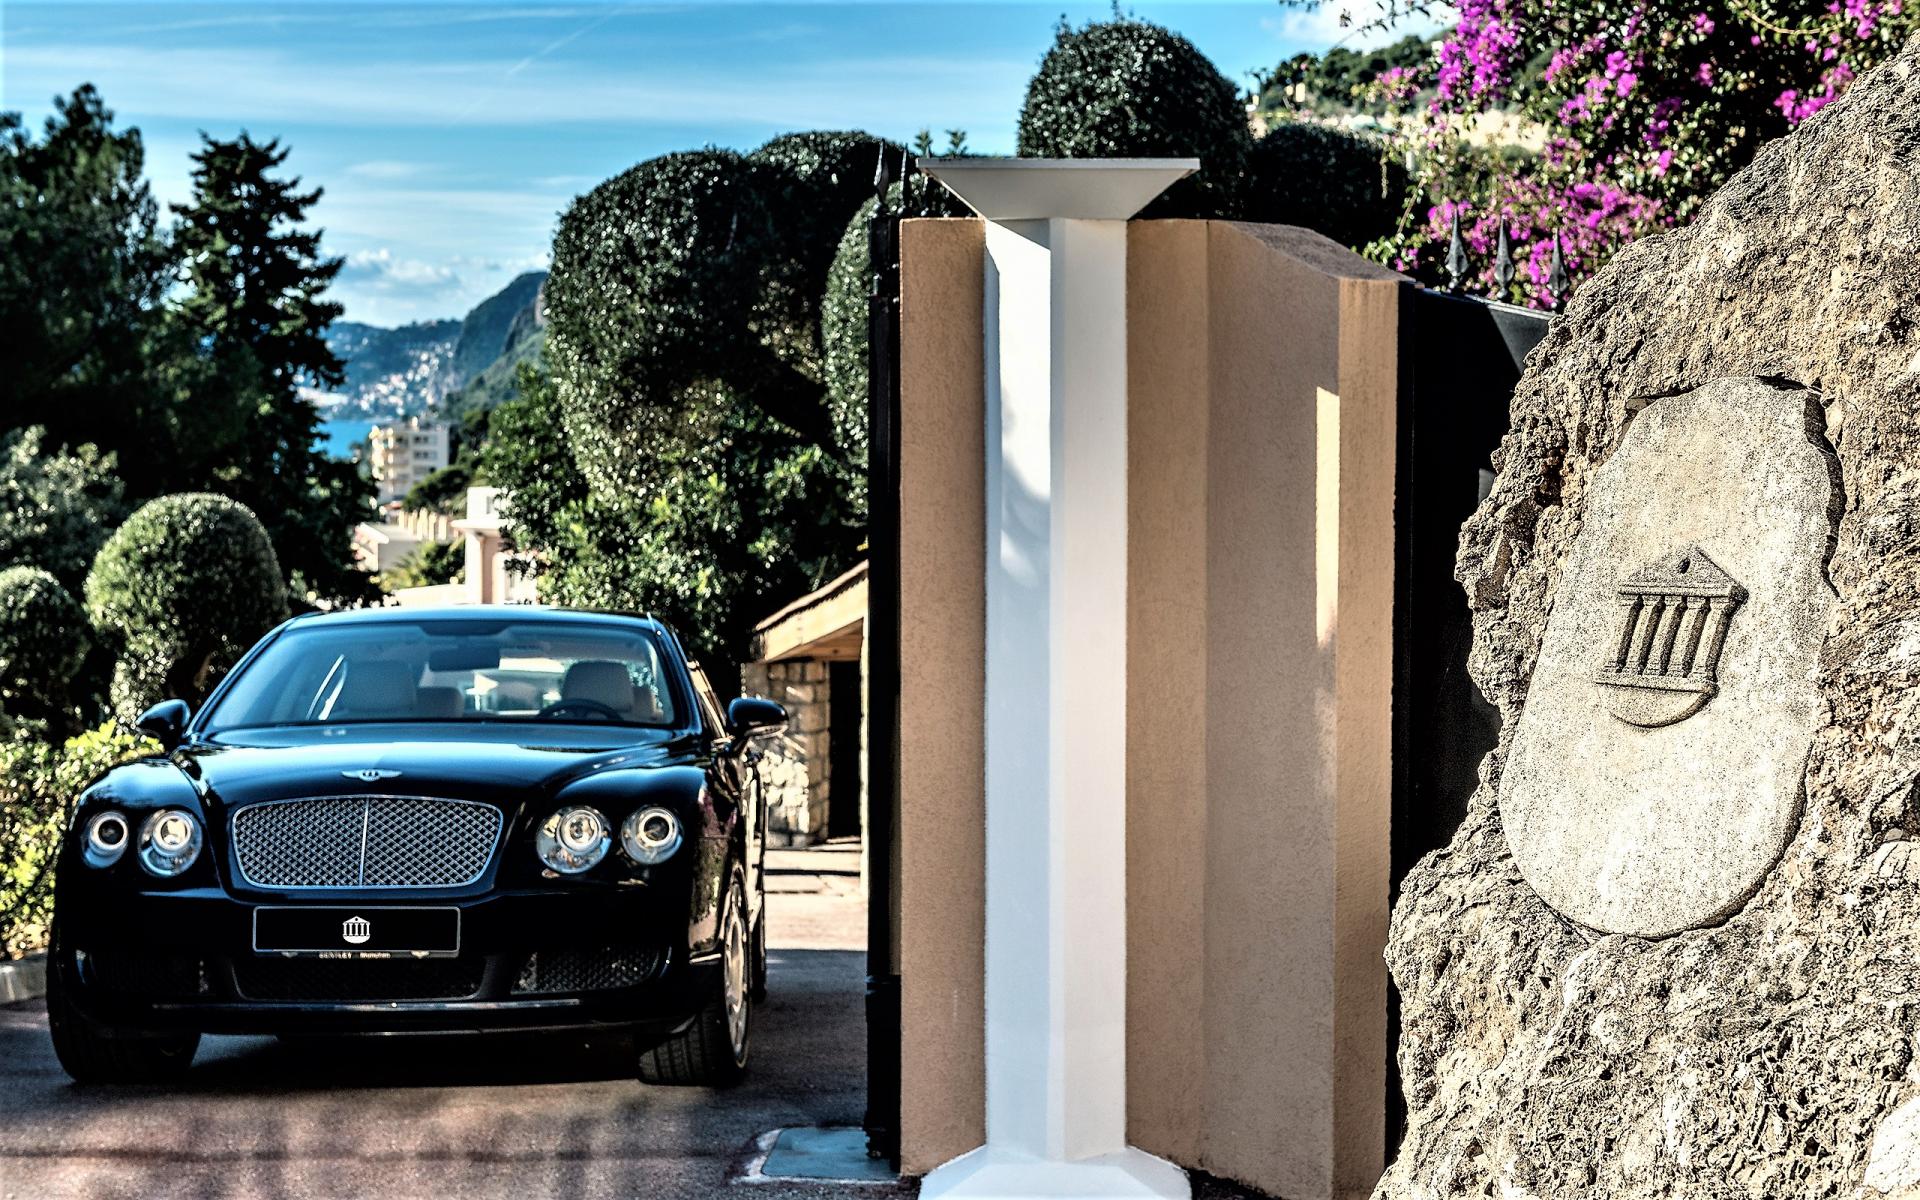 THIS BEAUTIFUL BENTLEY CAR IS FOR RENT AT VILLA ROSE